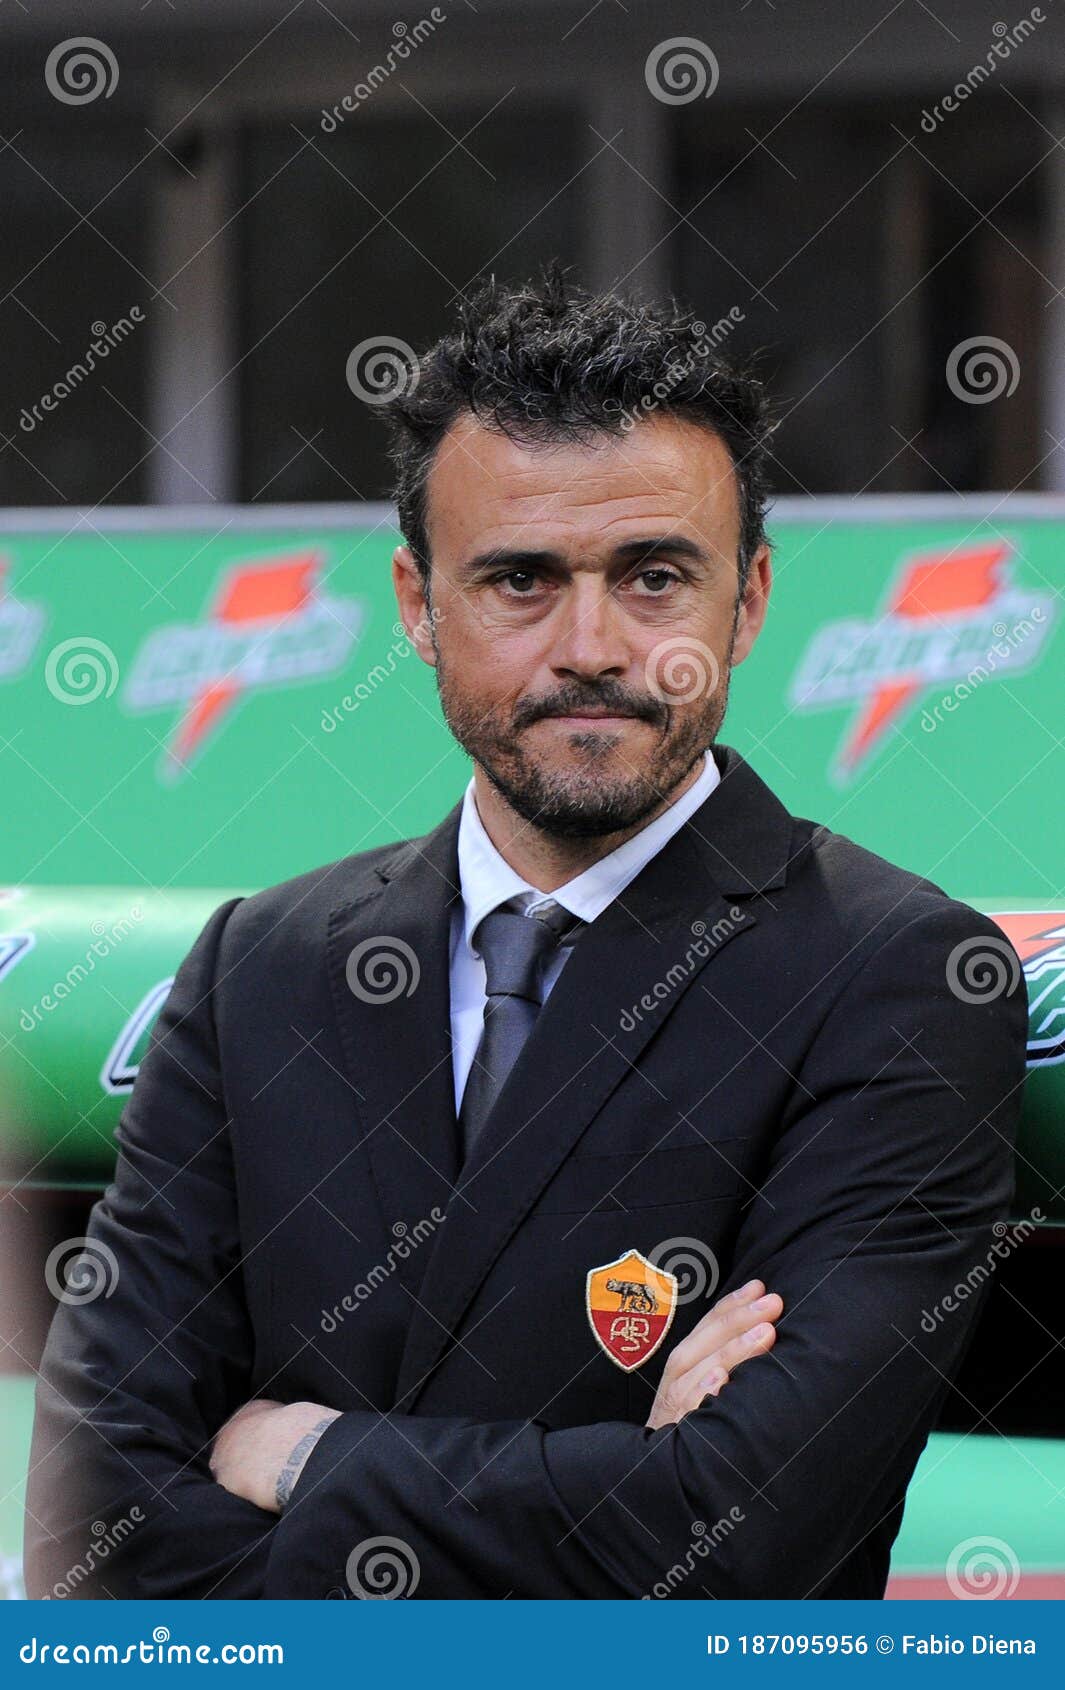 Luis Enrique Photos Free Royalty Free Stock Photos From Dreamstime